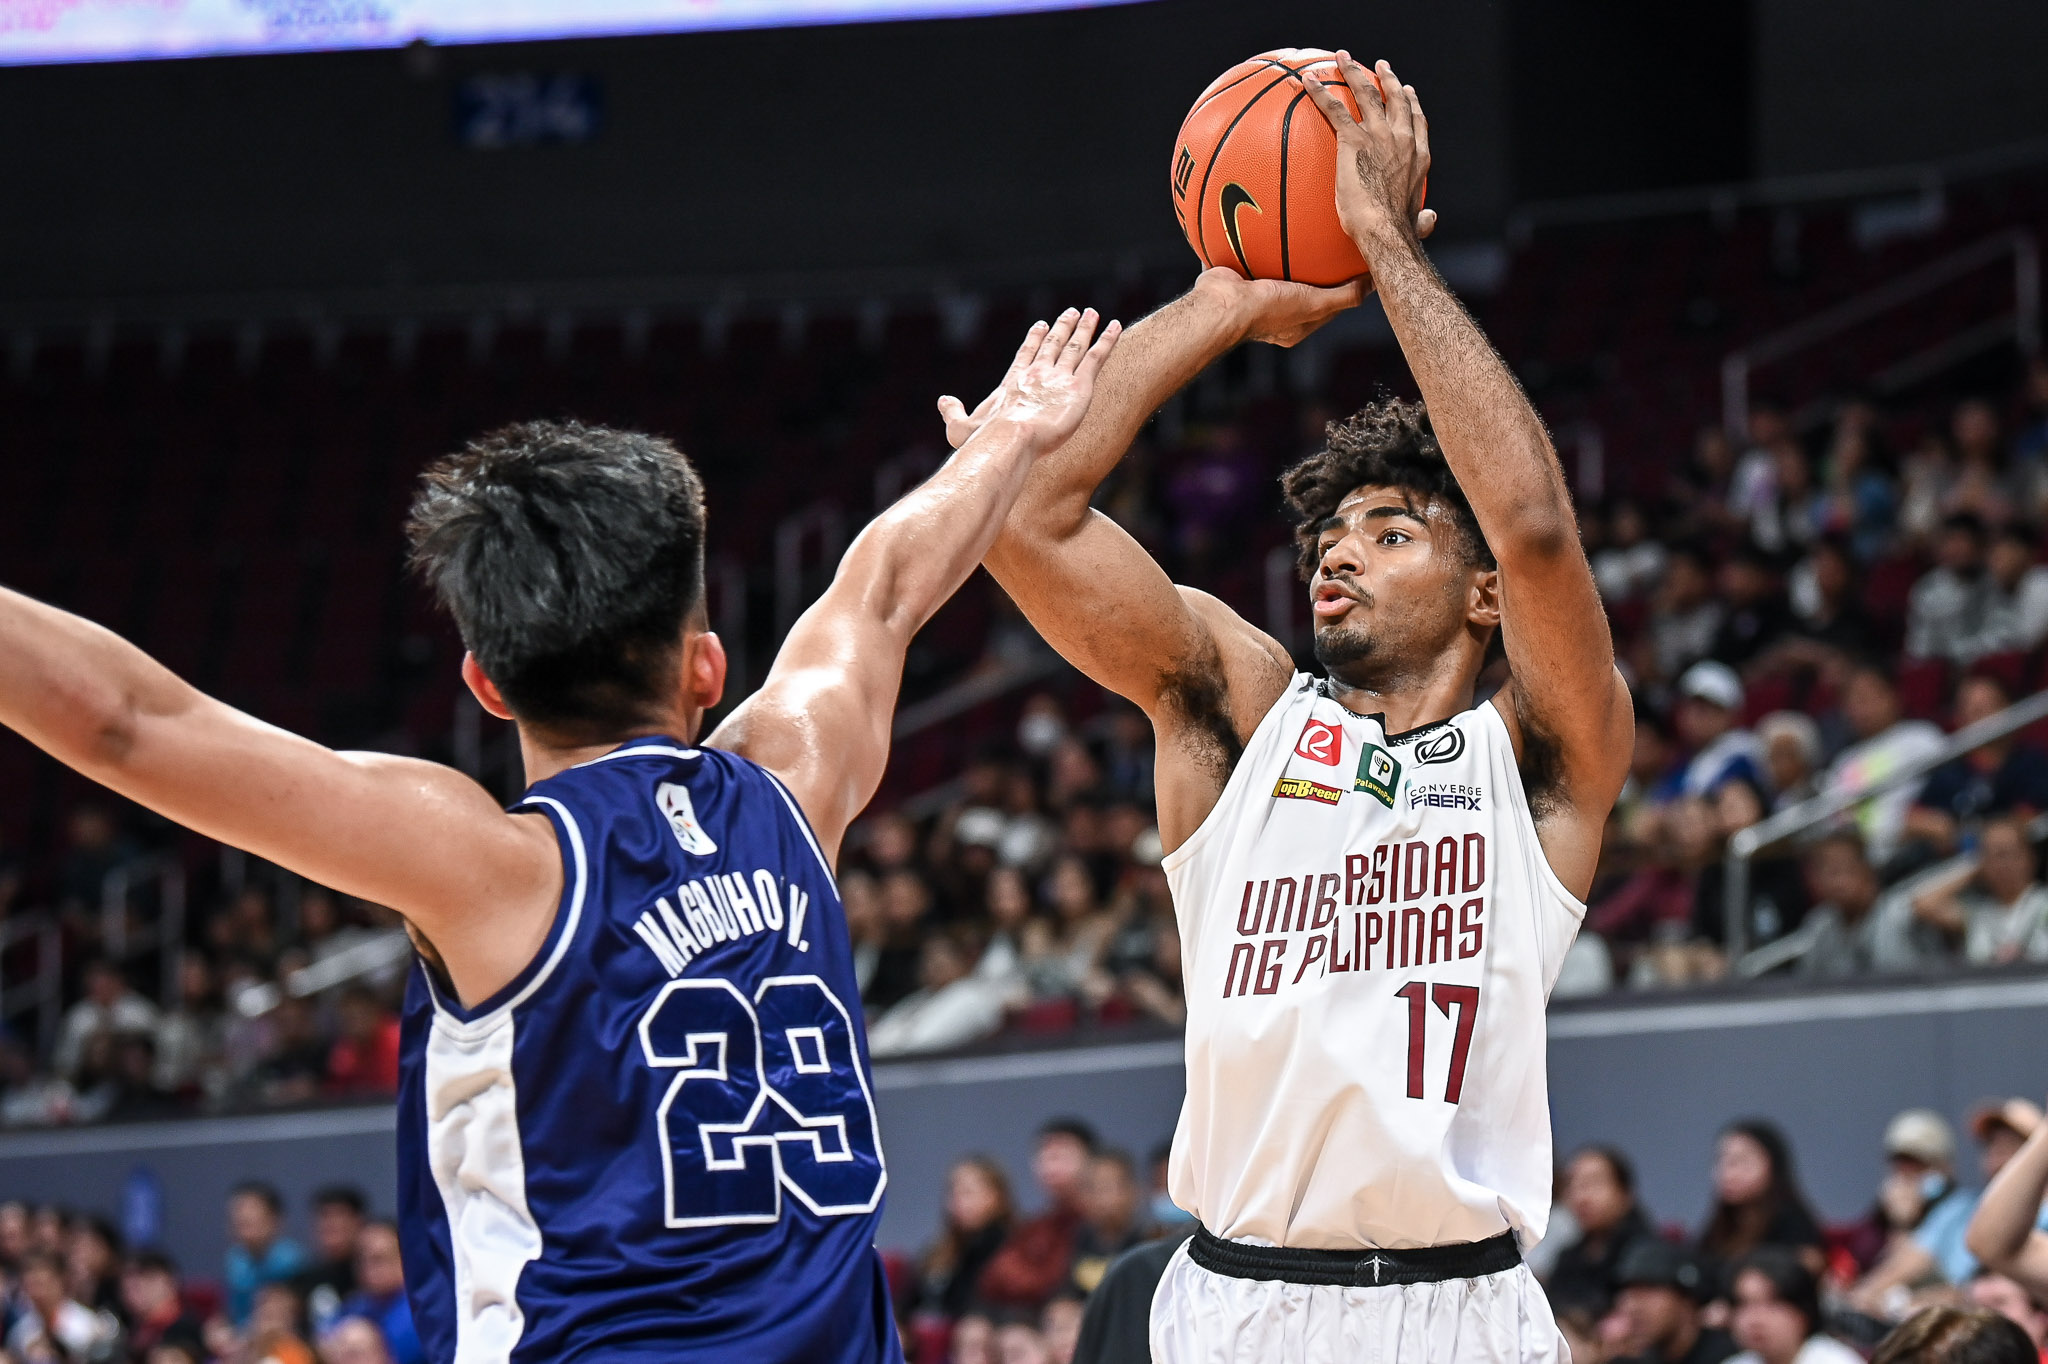 UP bounces back from Ateneo loss, dominates Adamson